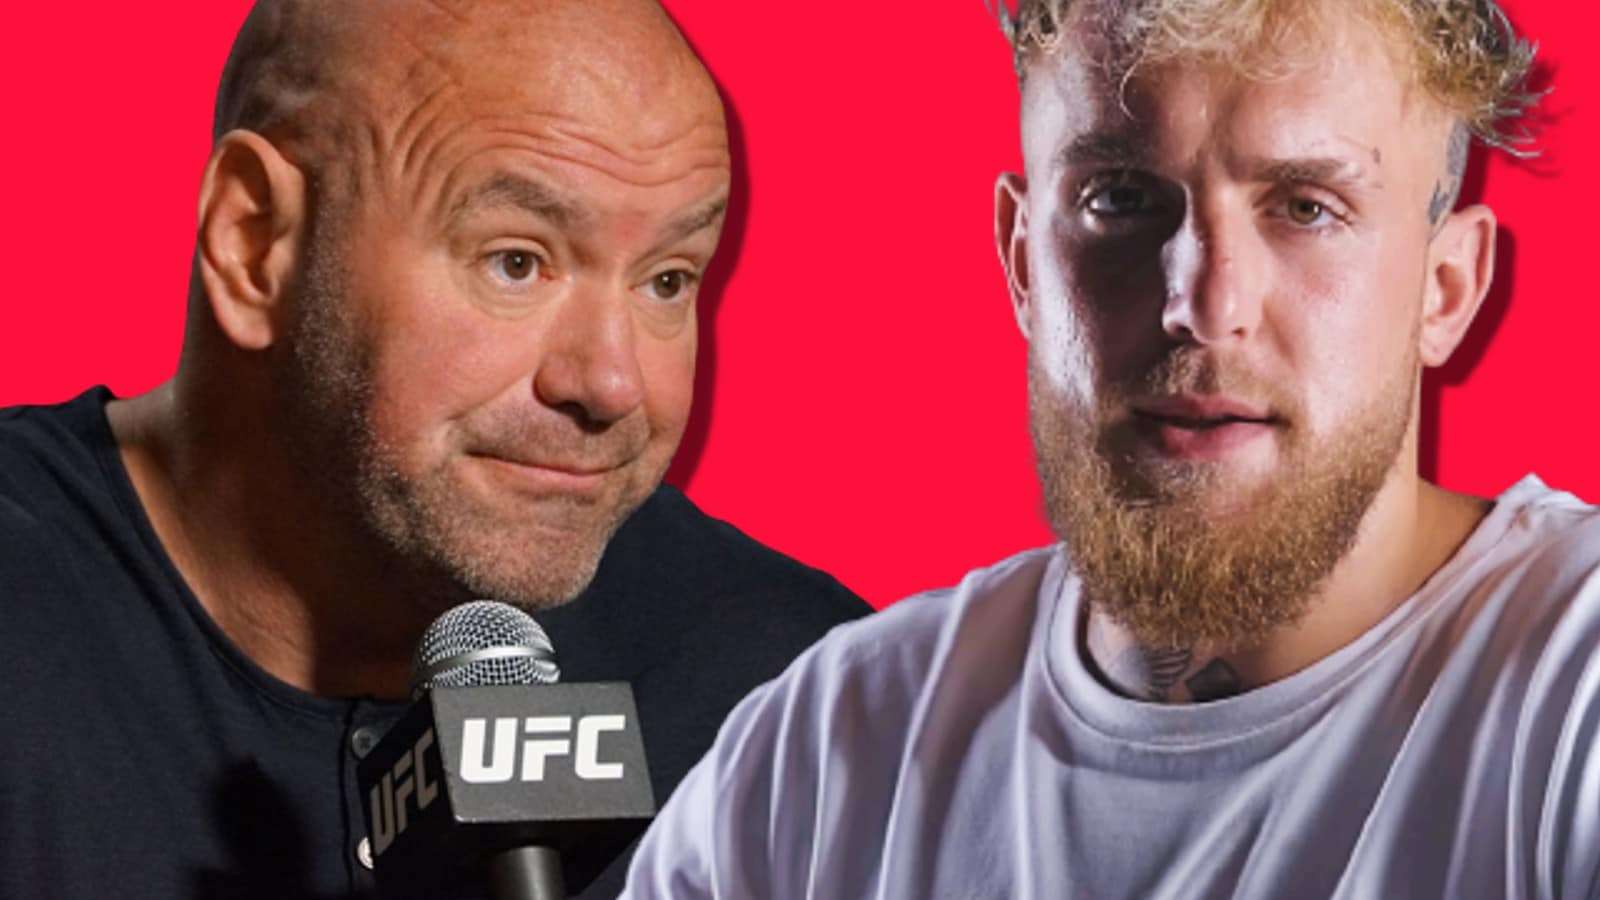 Jake Paul and Dana White are in yet another spat.